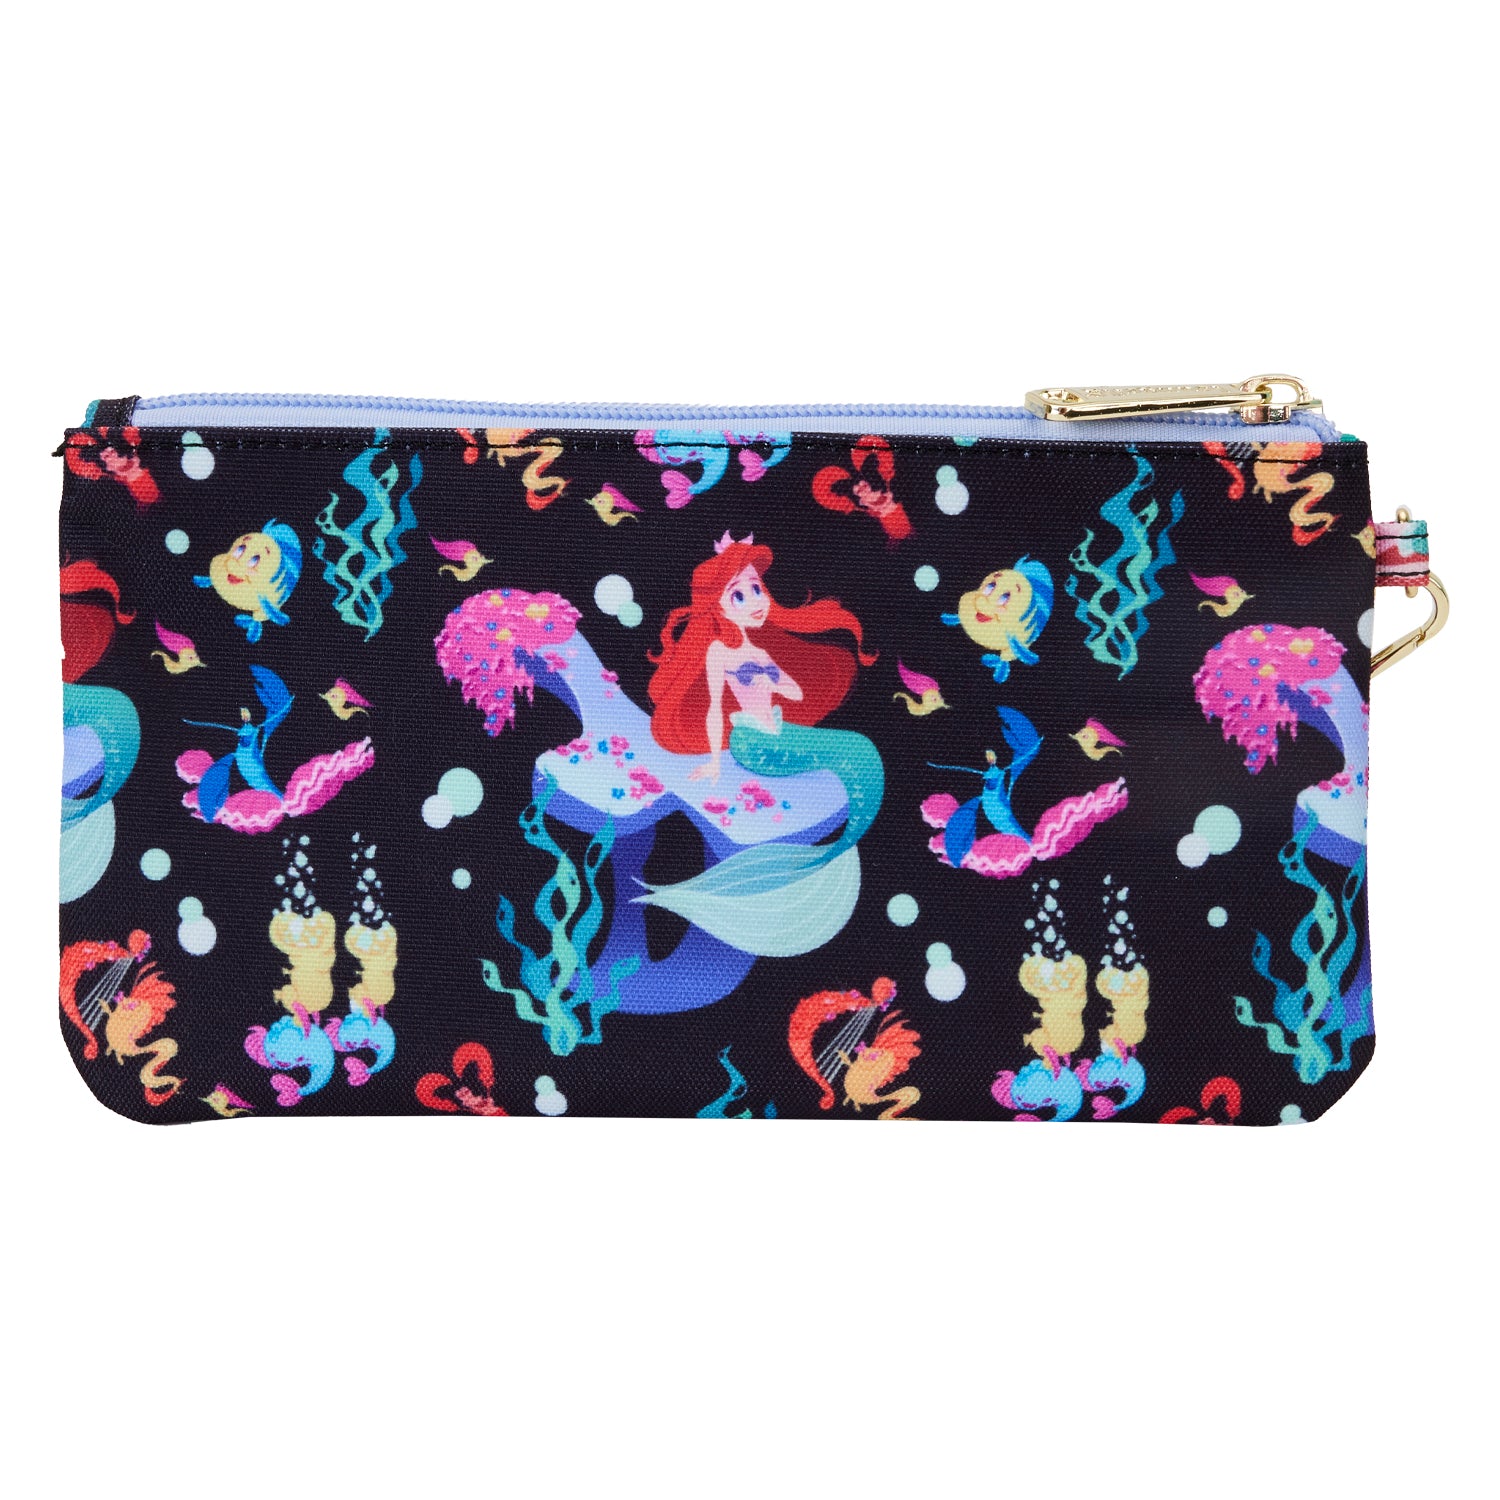 Loungefly Disney The Little Mermaid 35th Anniversary Life is the Bubbles Wristlet Wallet